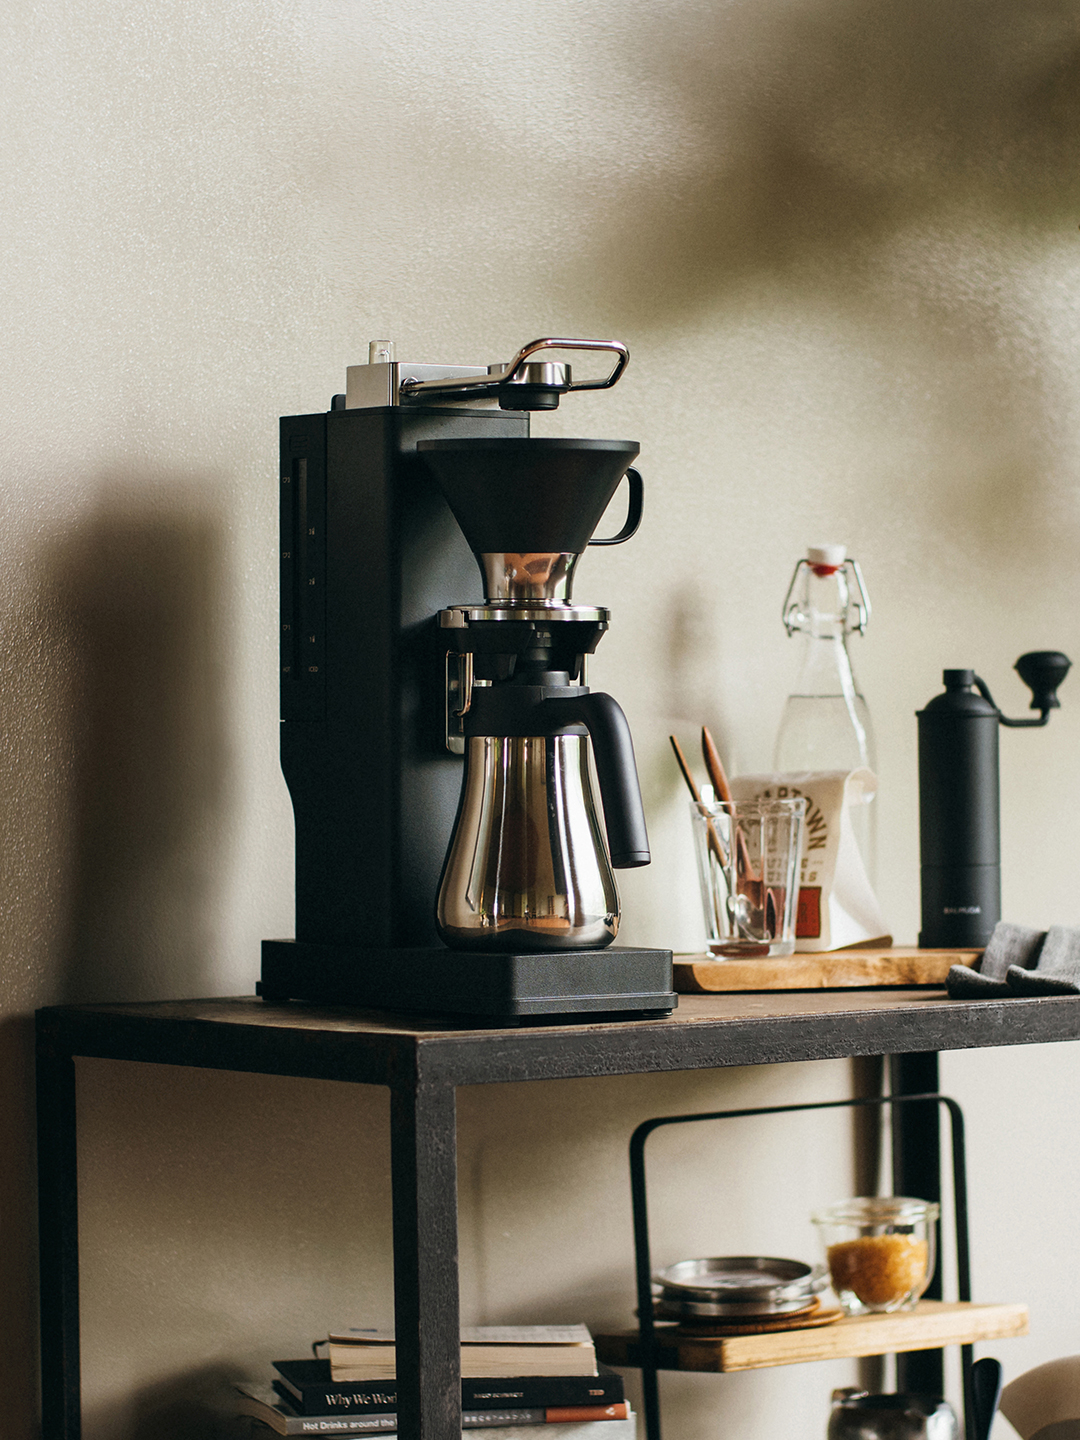 This automatic pour over coffee maker by Balmuda creates the ideal cup